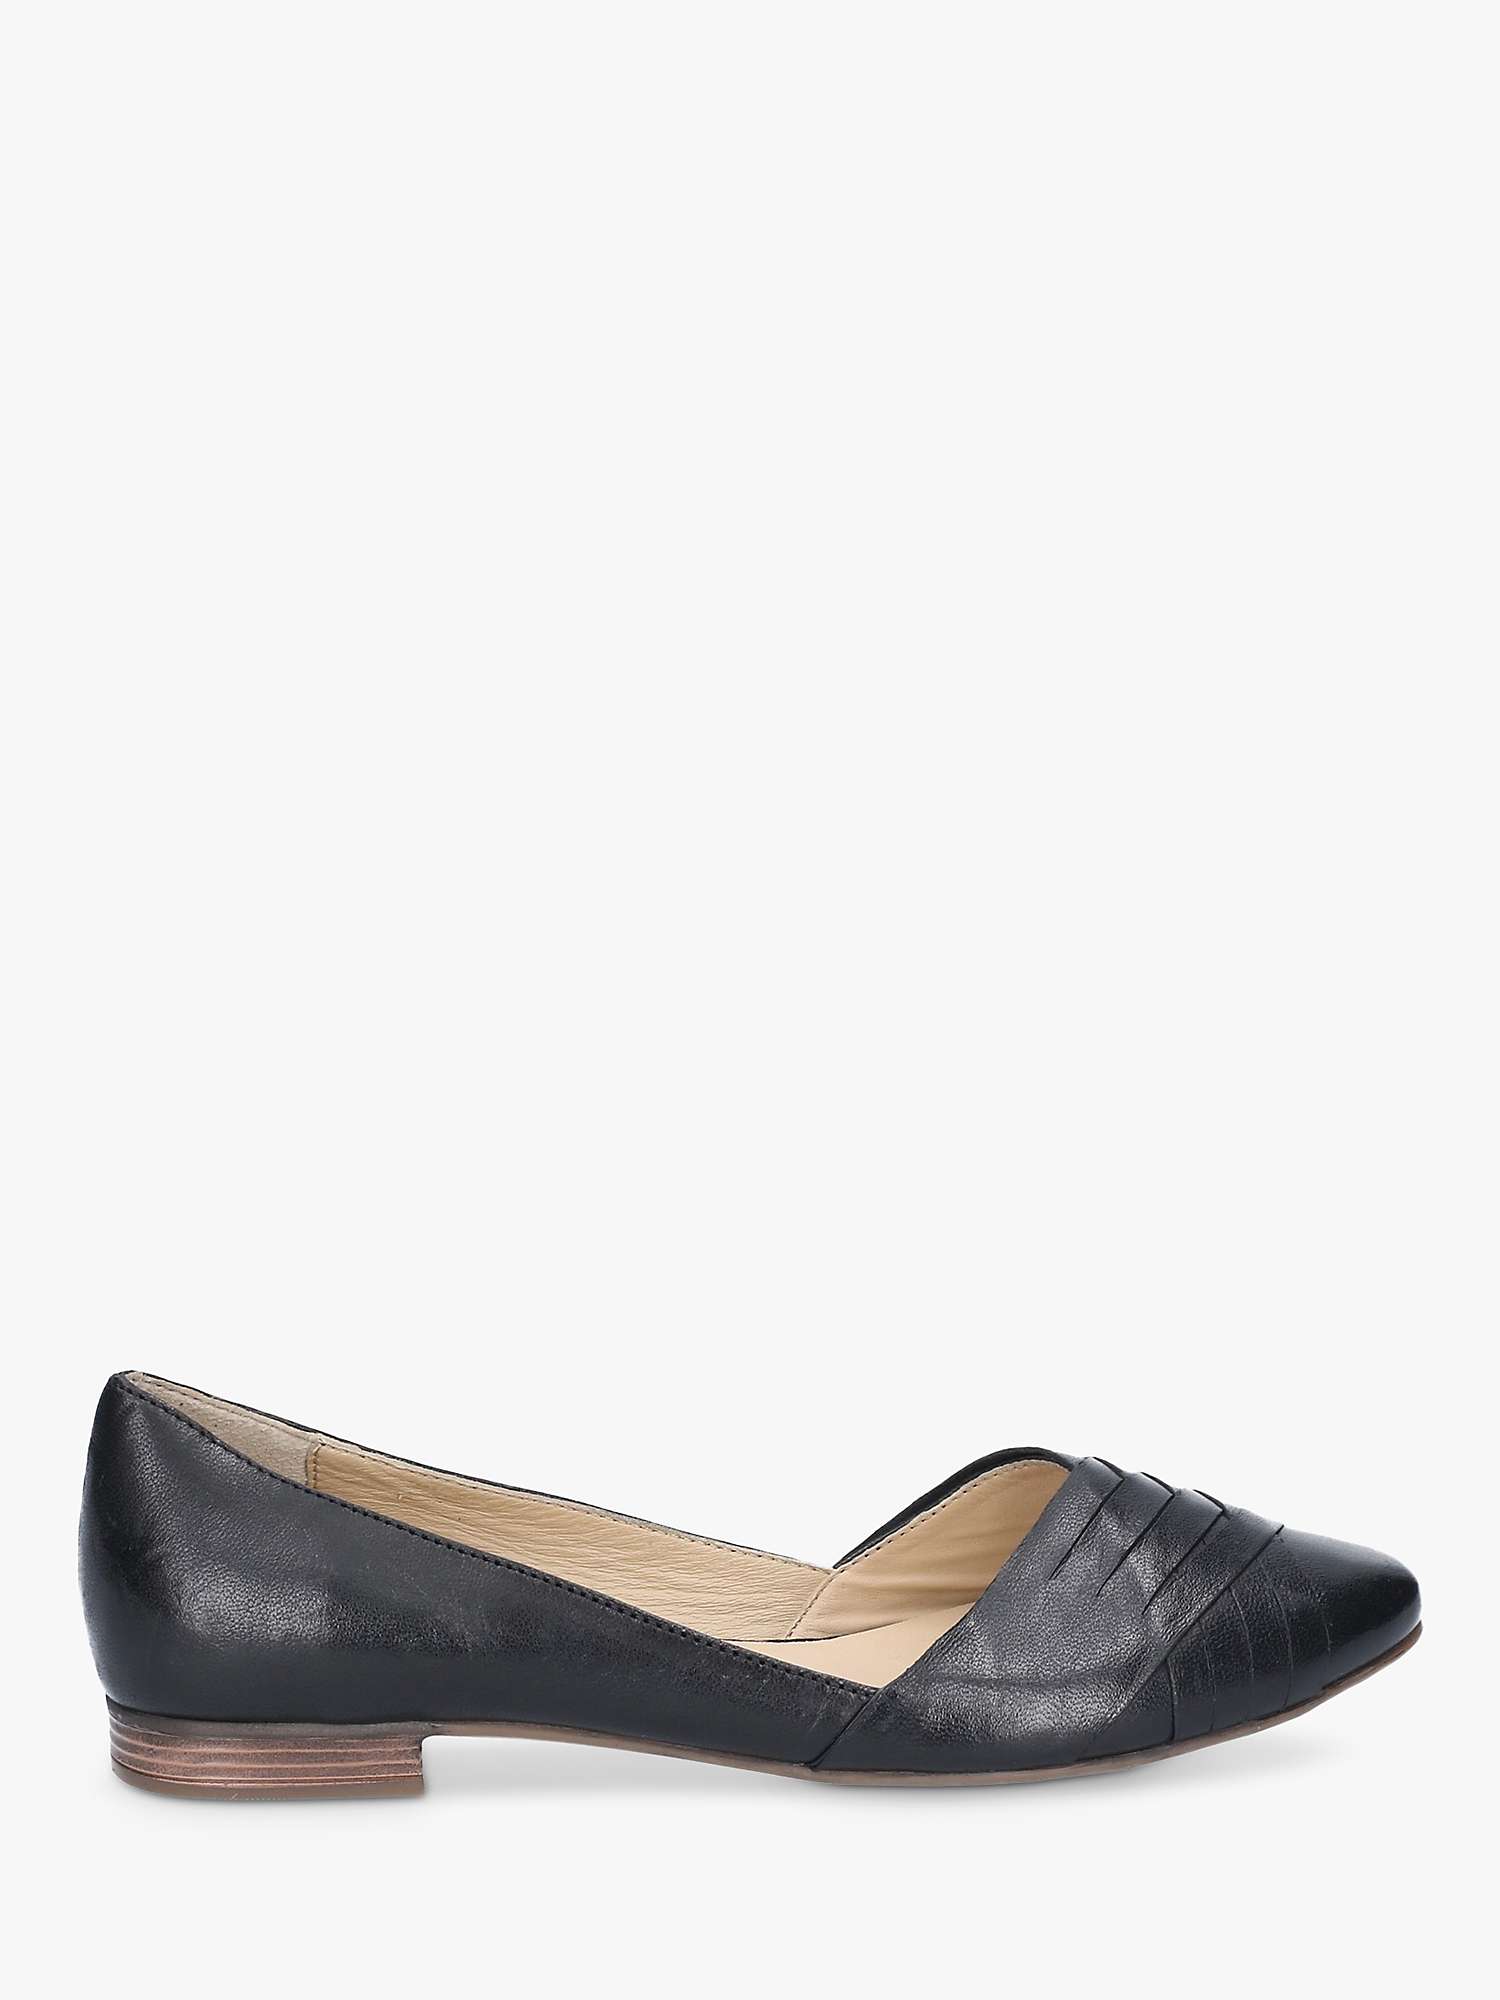 Buy Hush Puppies Marley Leather Ballerina Slip On Shoes Online at johnlewis.com